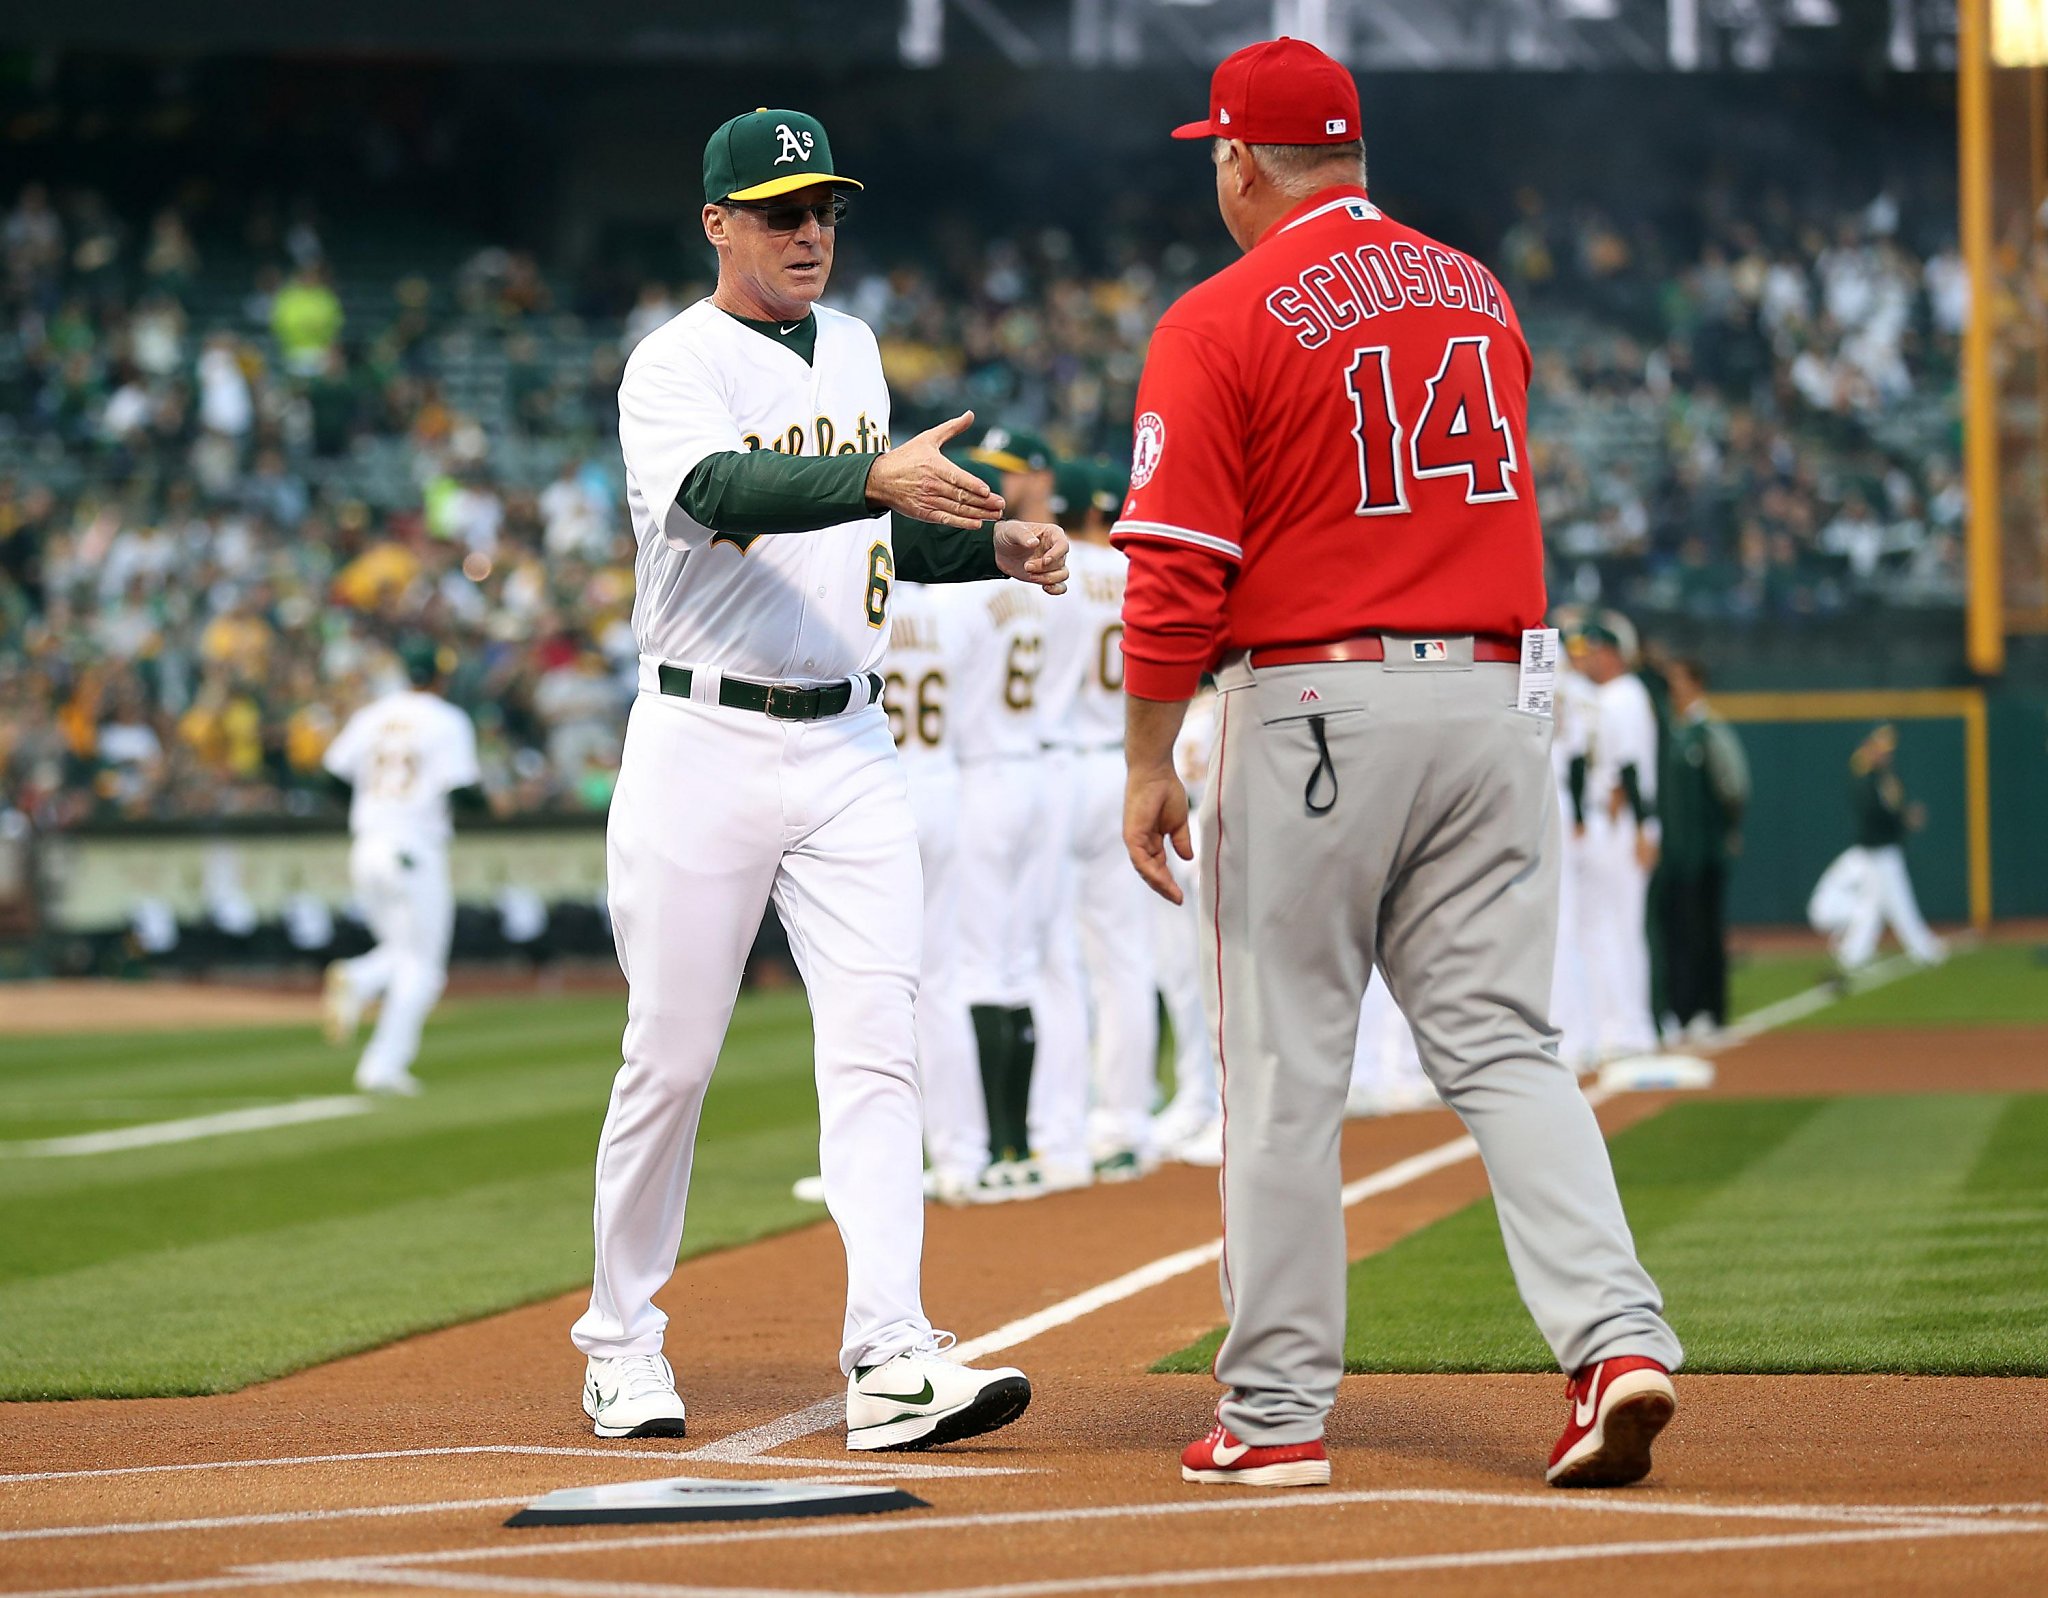 On the edge of a meaningful milestone, Mike Scioscia reflects on